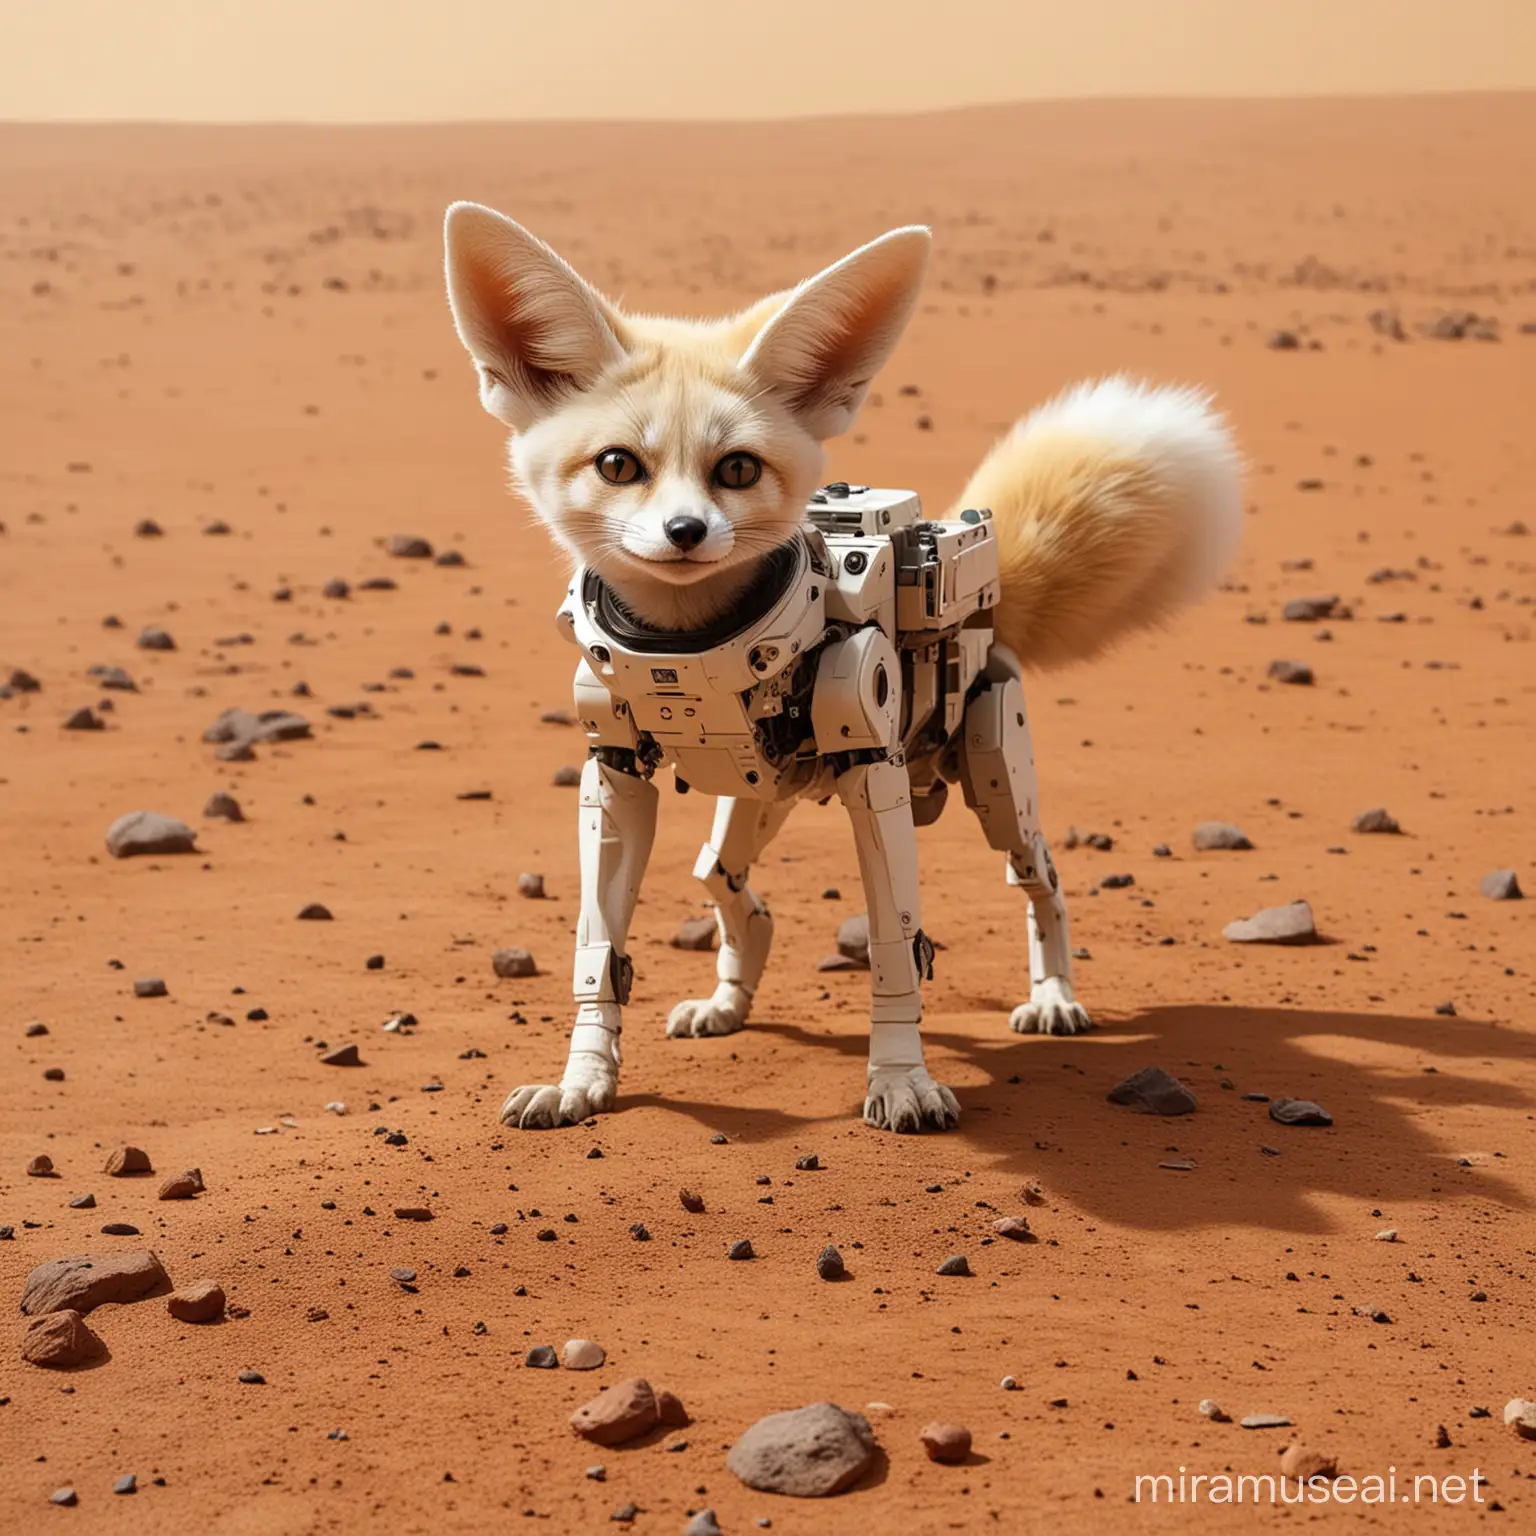 A robot fennec fox on mars surface. Also there is a sand storm